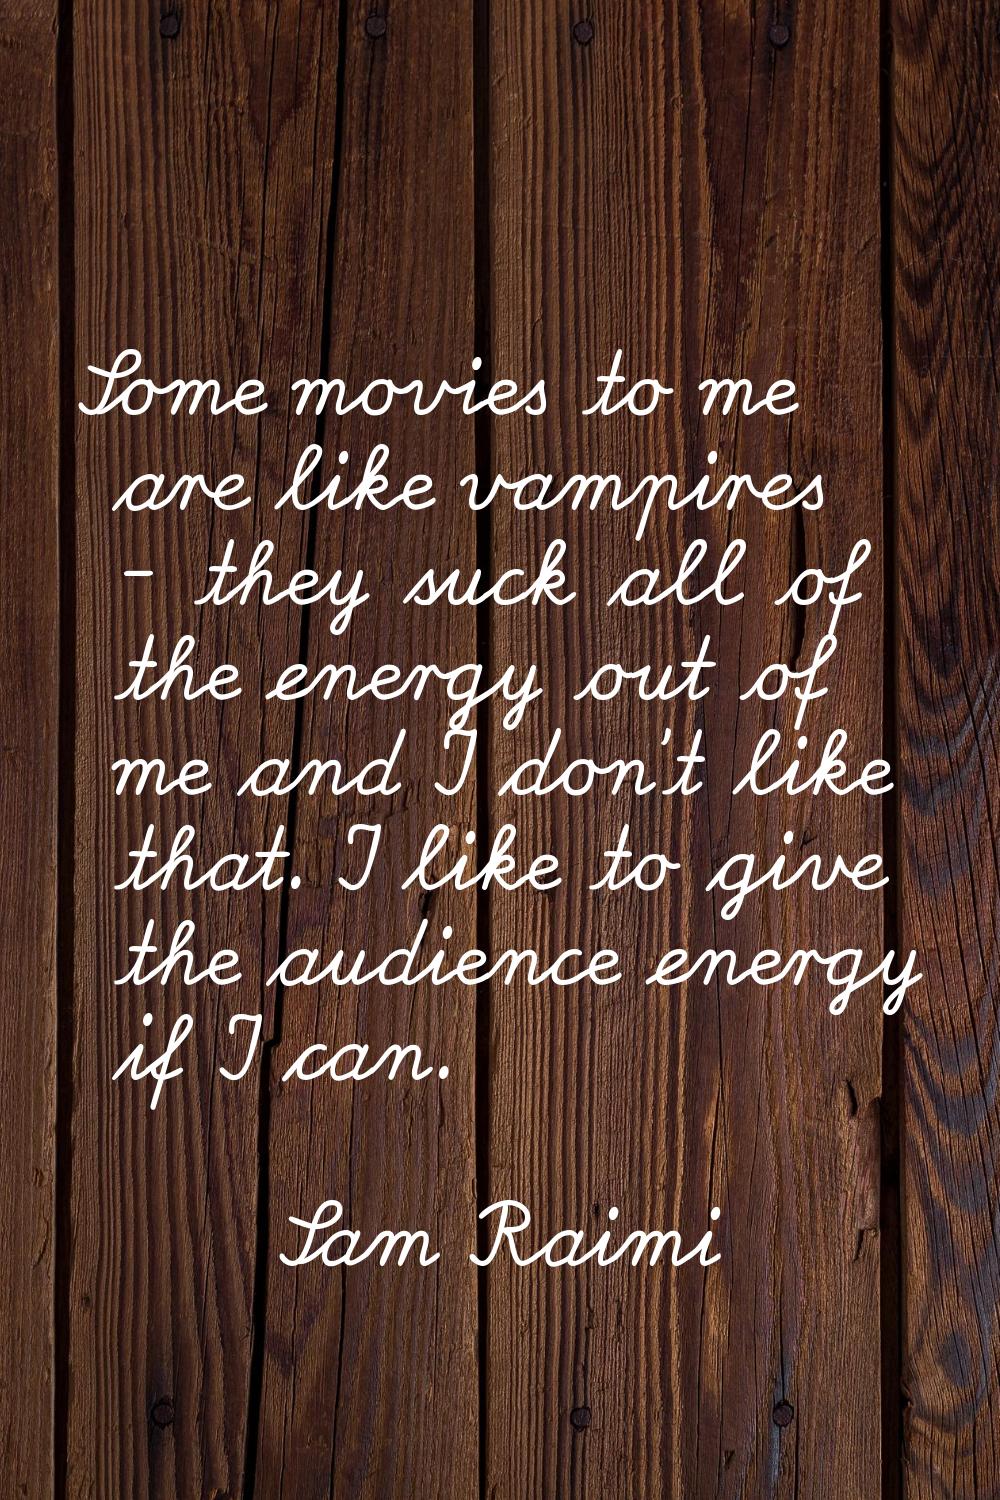 Some movies to me are like vampires - they suck all of the energy out of me and I don't like that. 